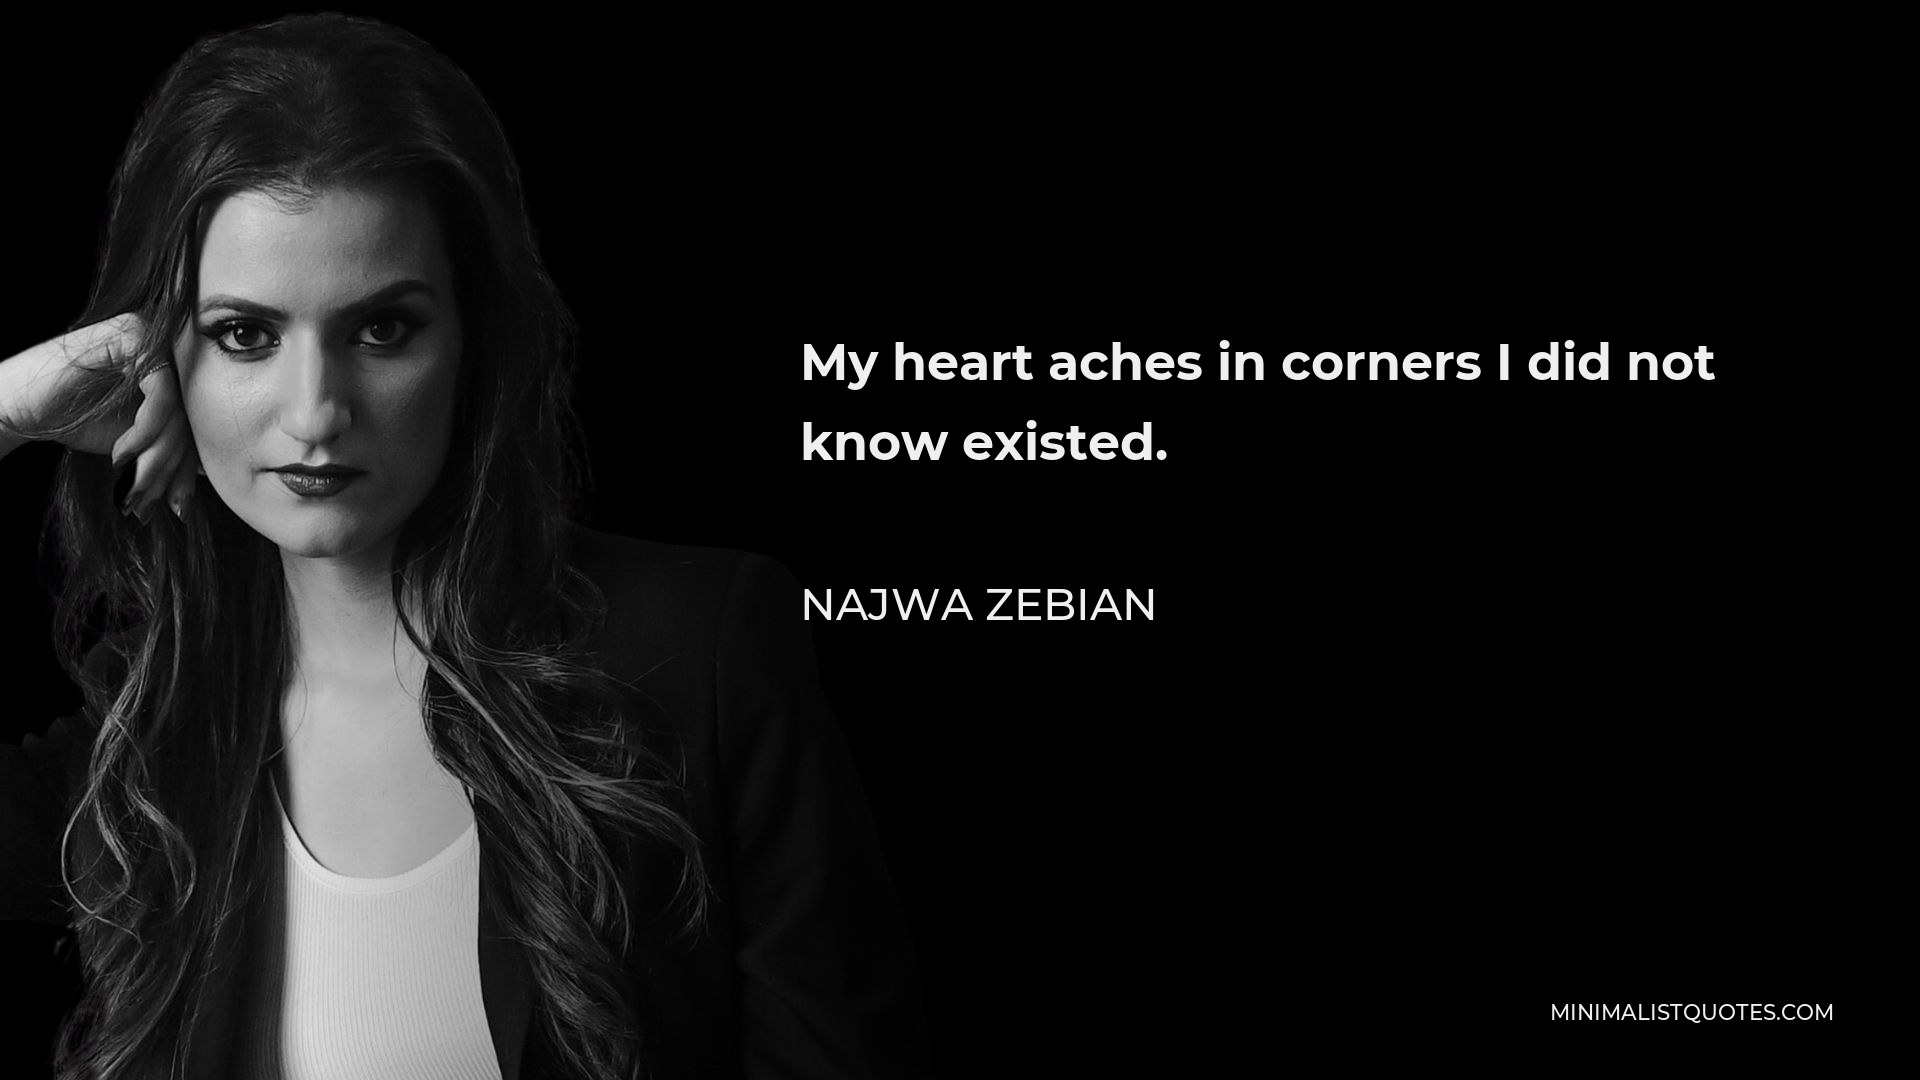 Najwa Zebian Quote - My heart aches in corners I did not know existed.